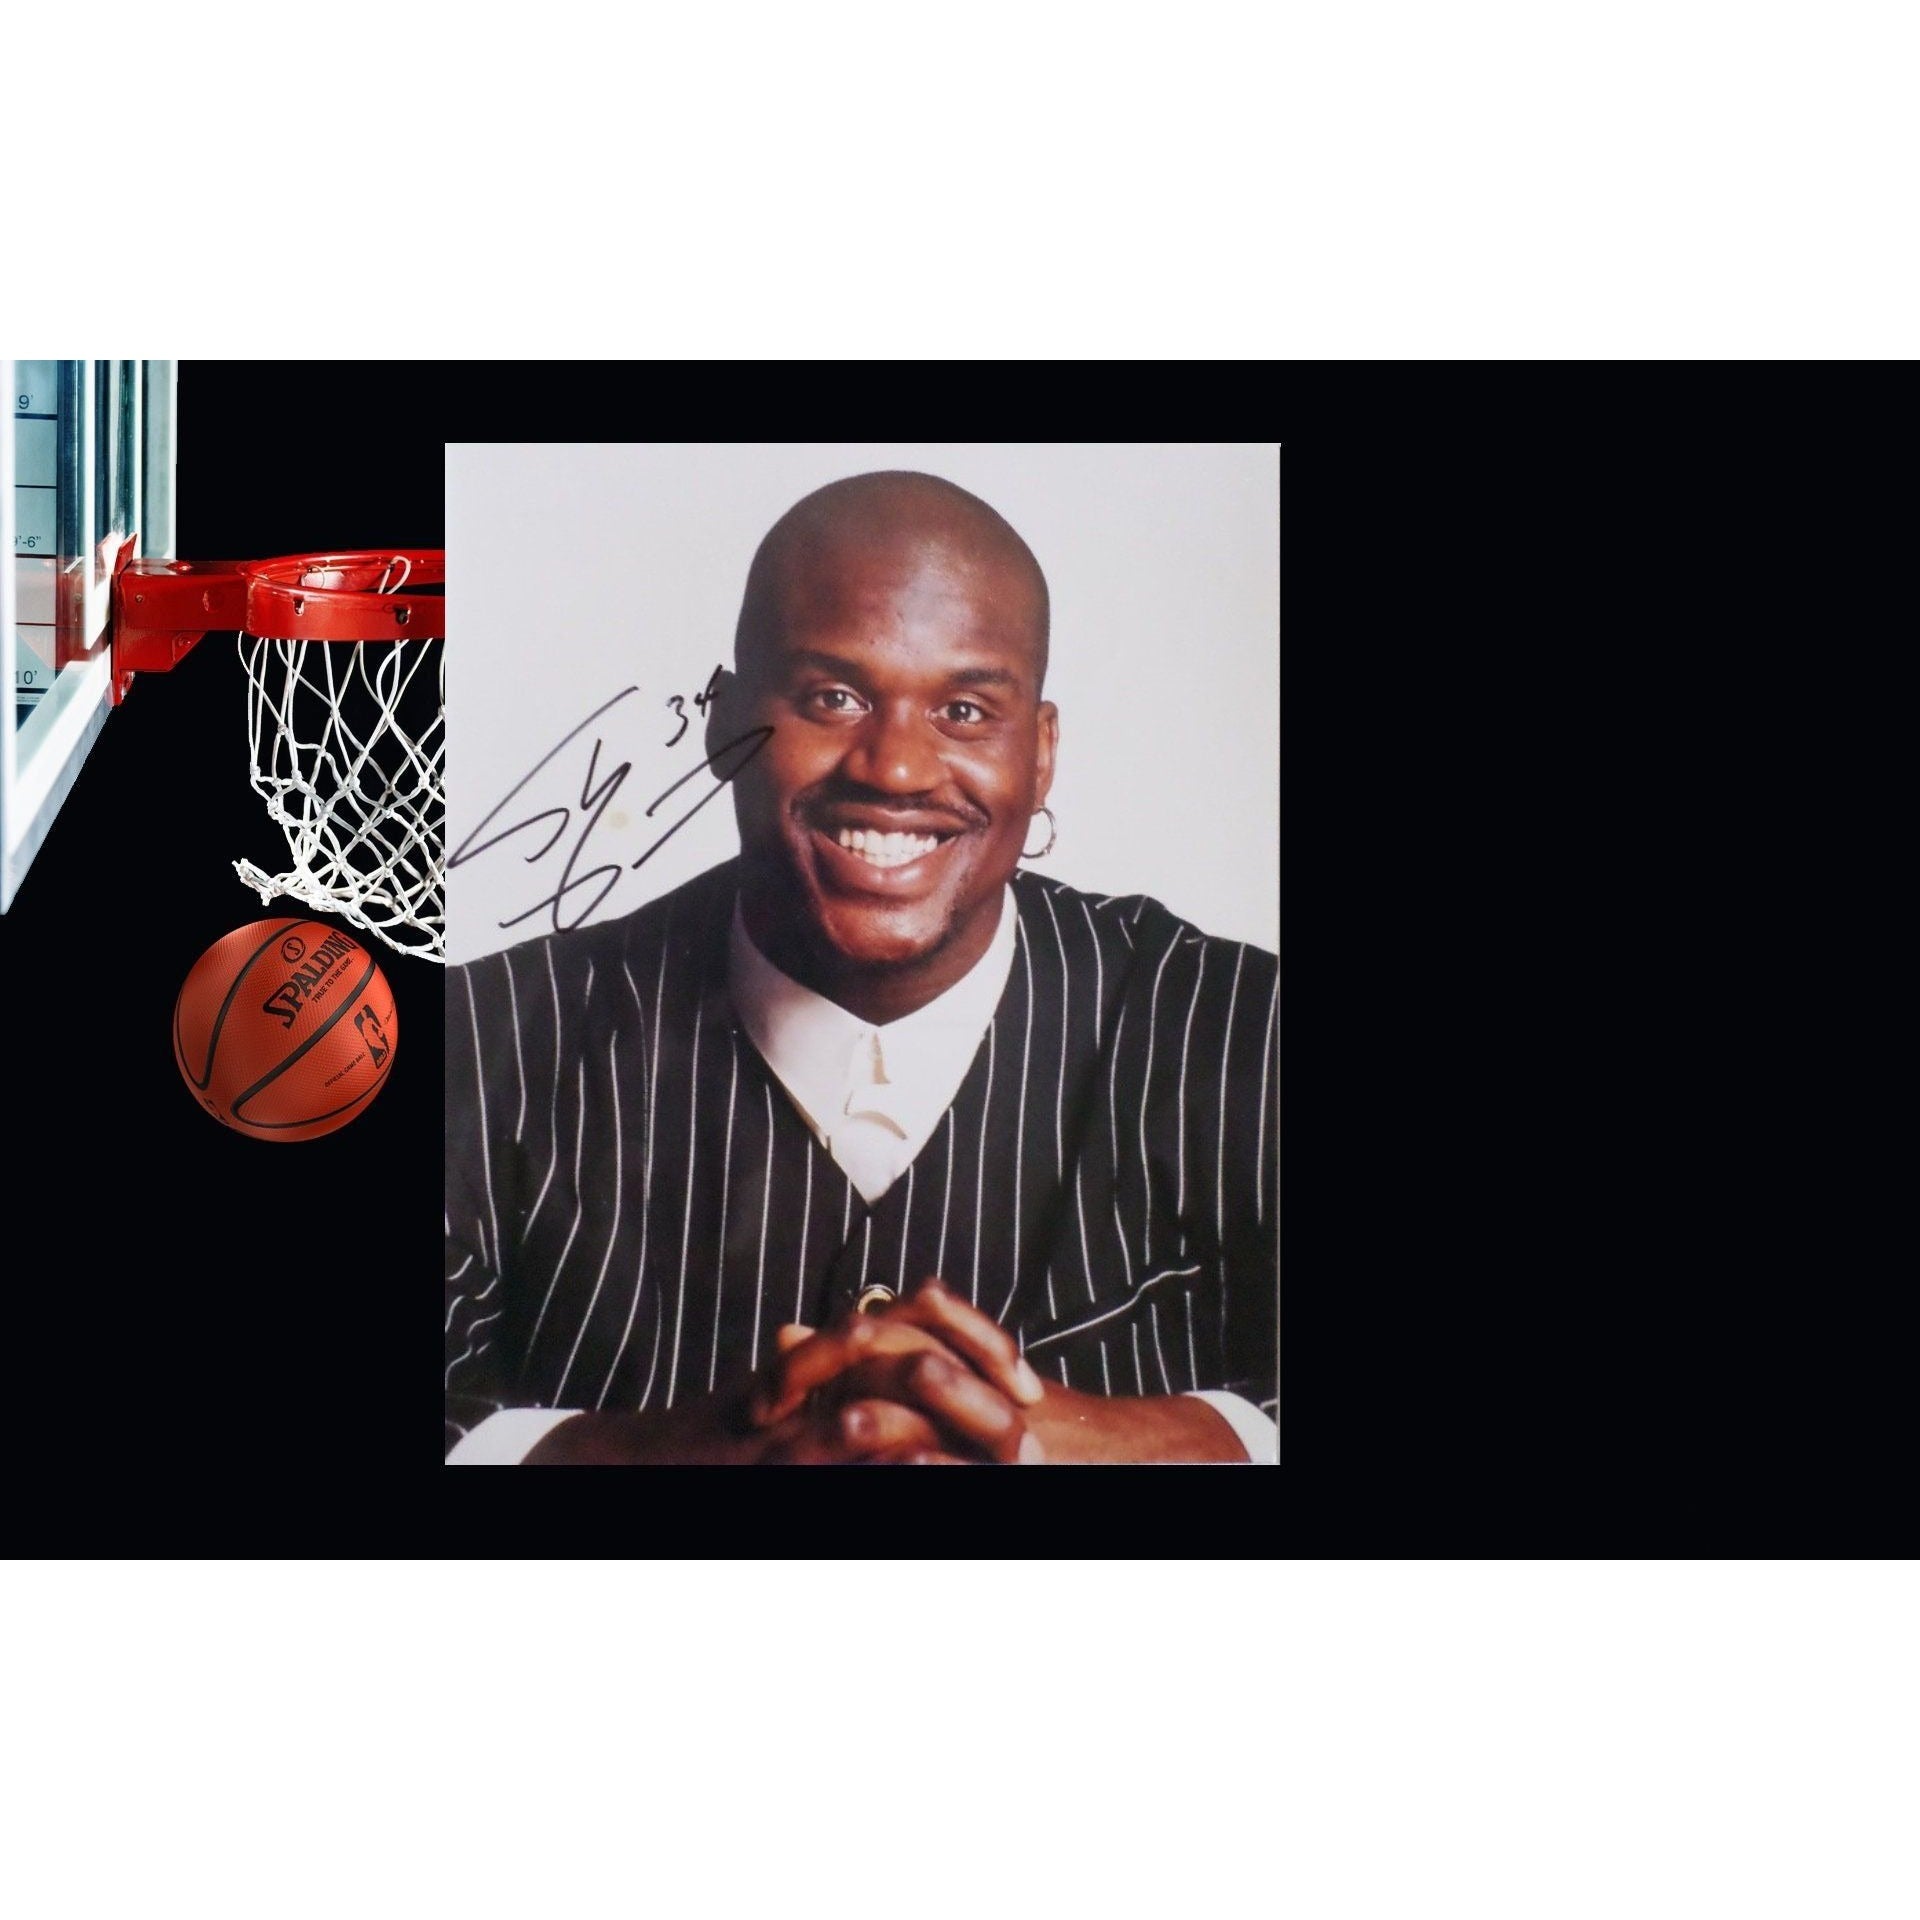 Shaquille O'Neal 8 x 10 signed photo